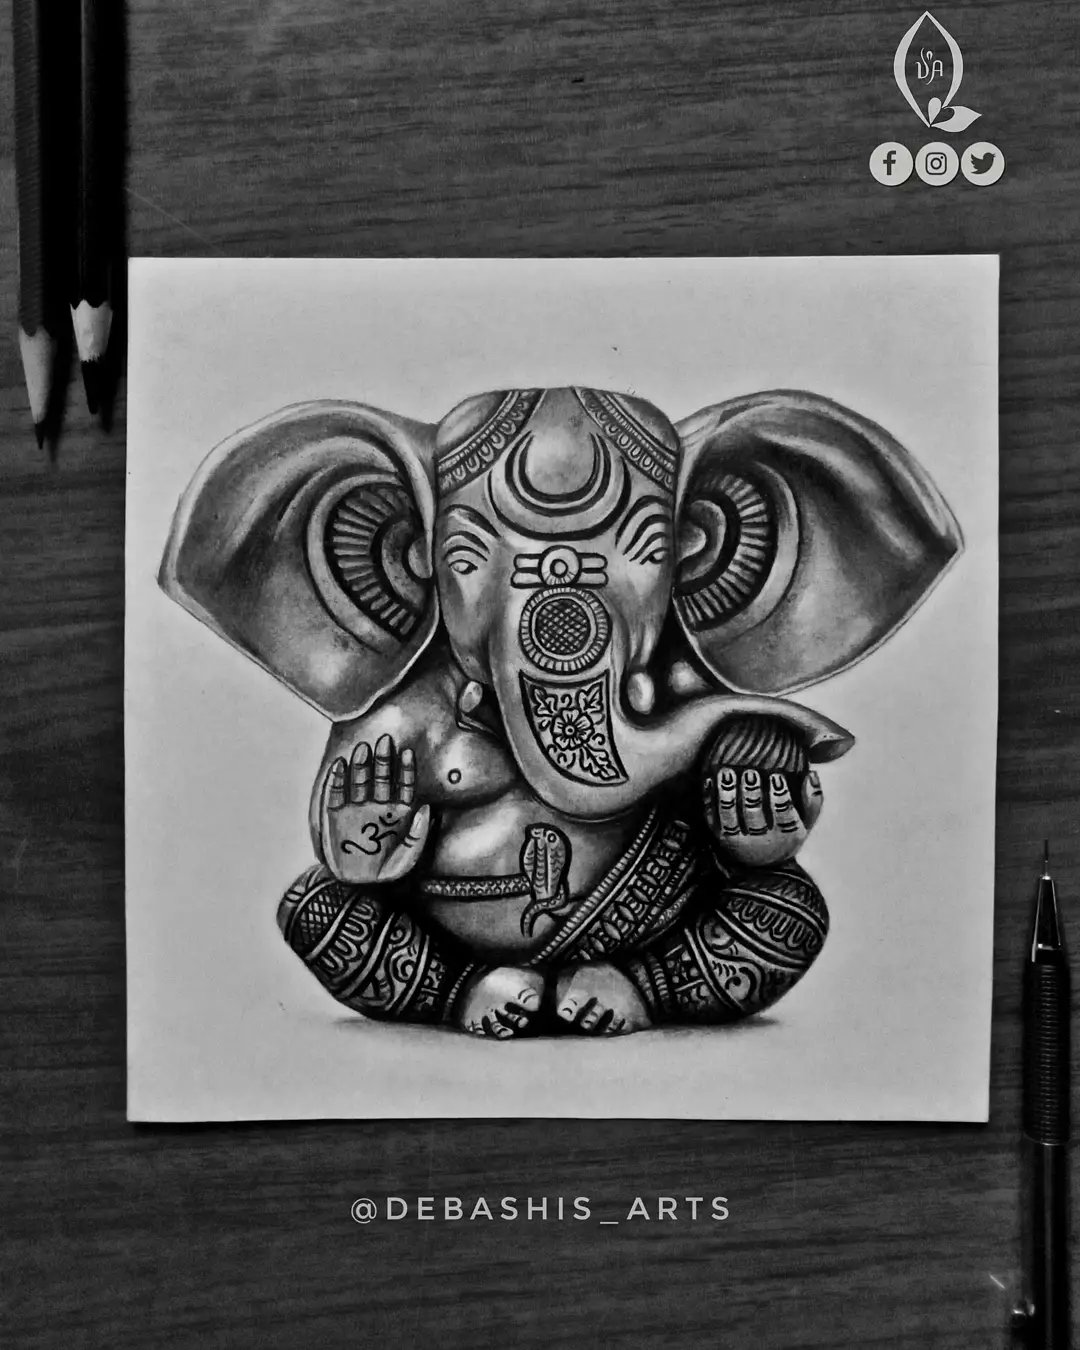 Arclic Multicolor Ganpati Bappa Painting, Size: A3 at Rs 1000 in Kanpur